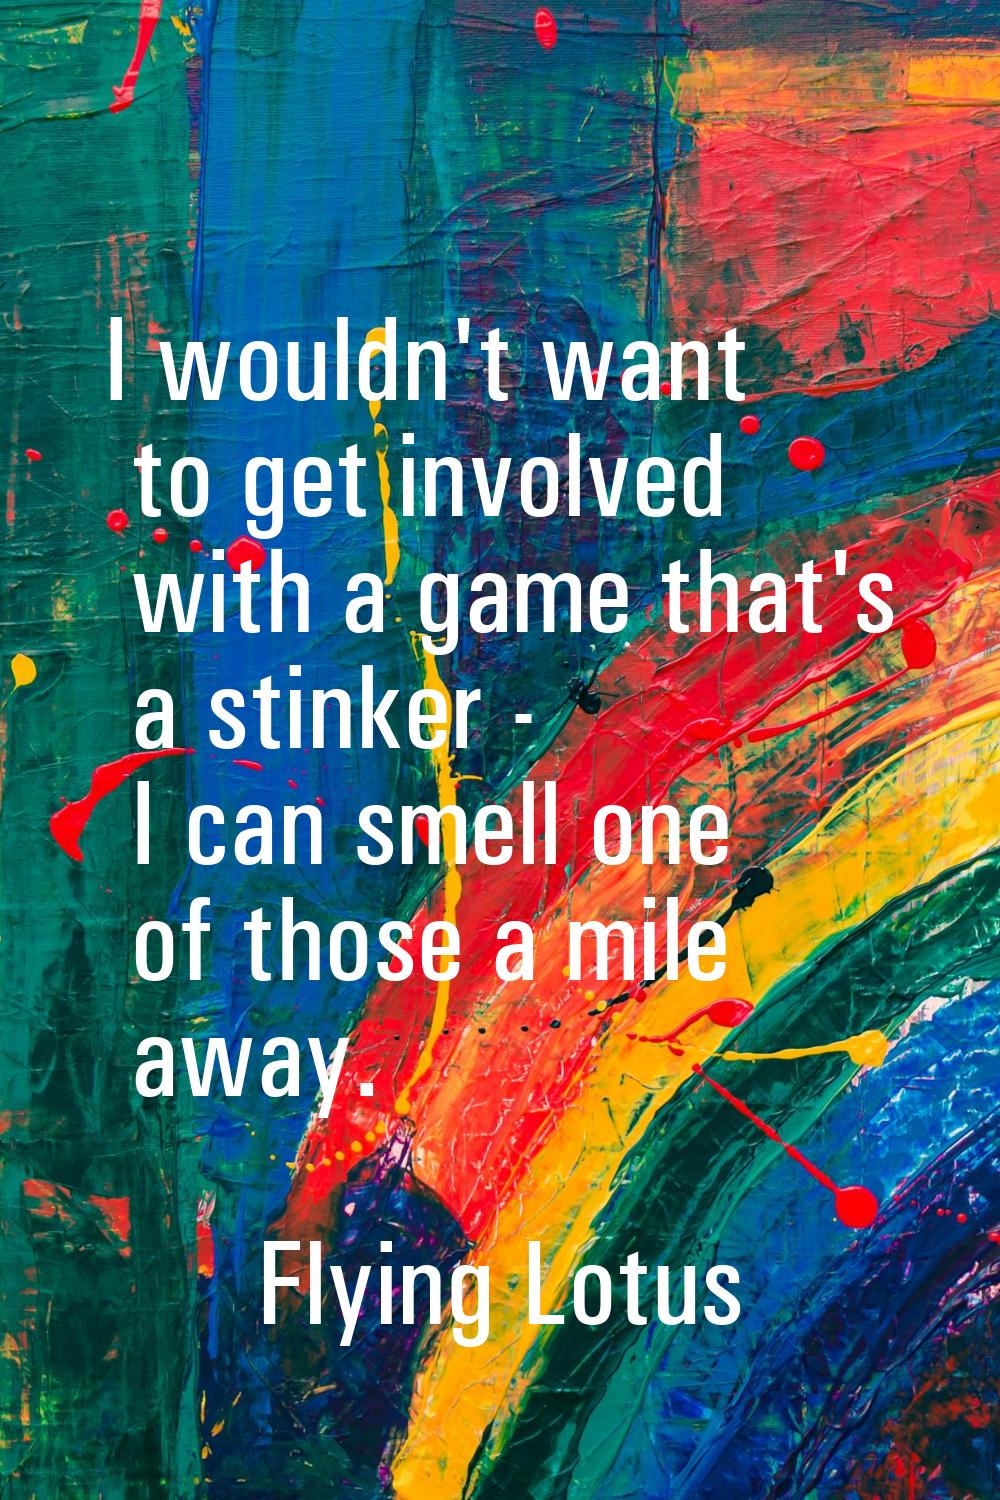 I wouldn't want to get involved with a game that's a stinker - I can smell one of those a mile away